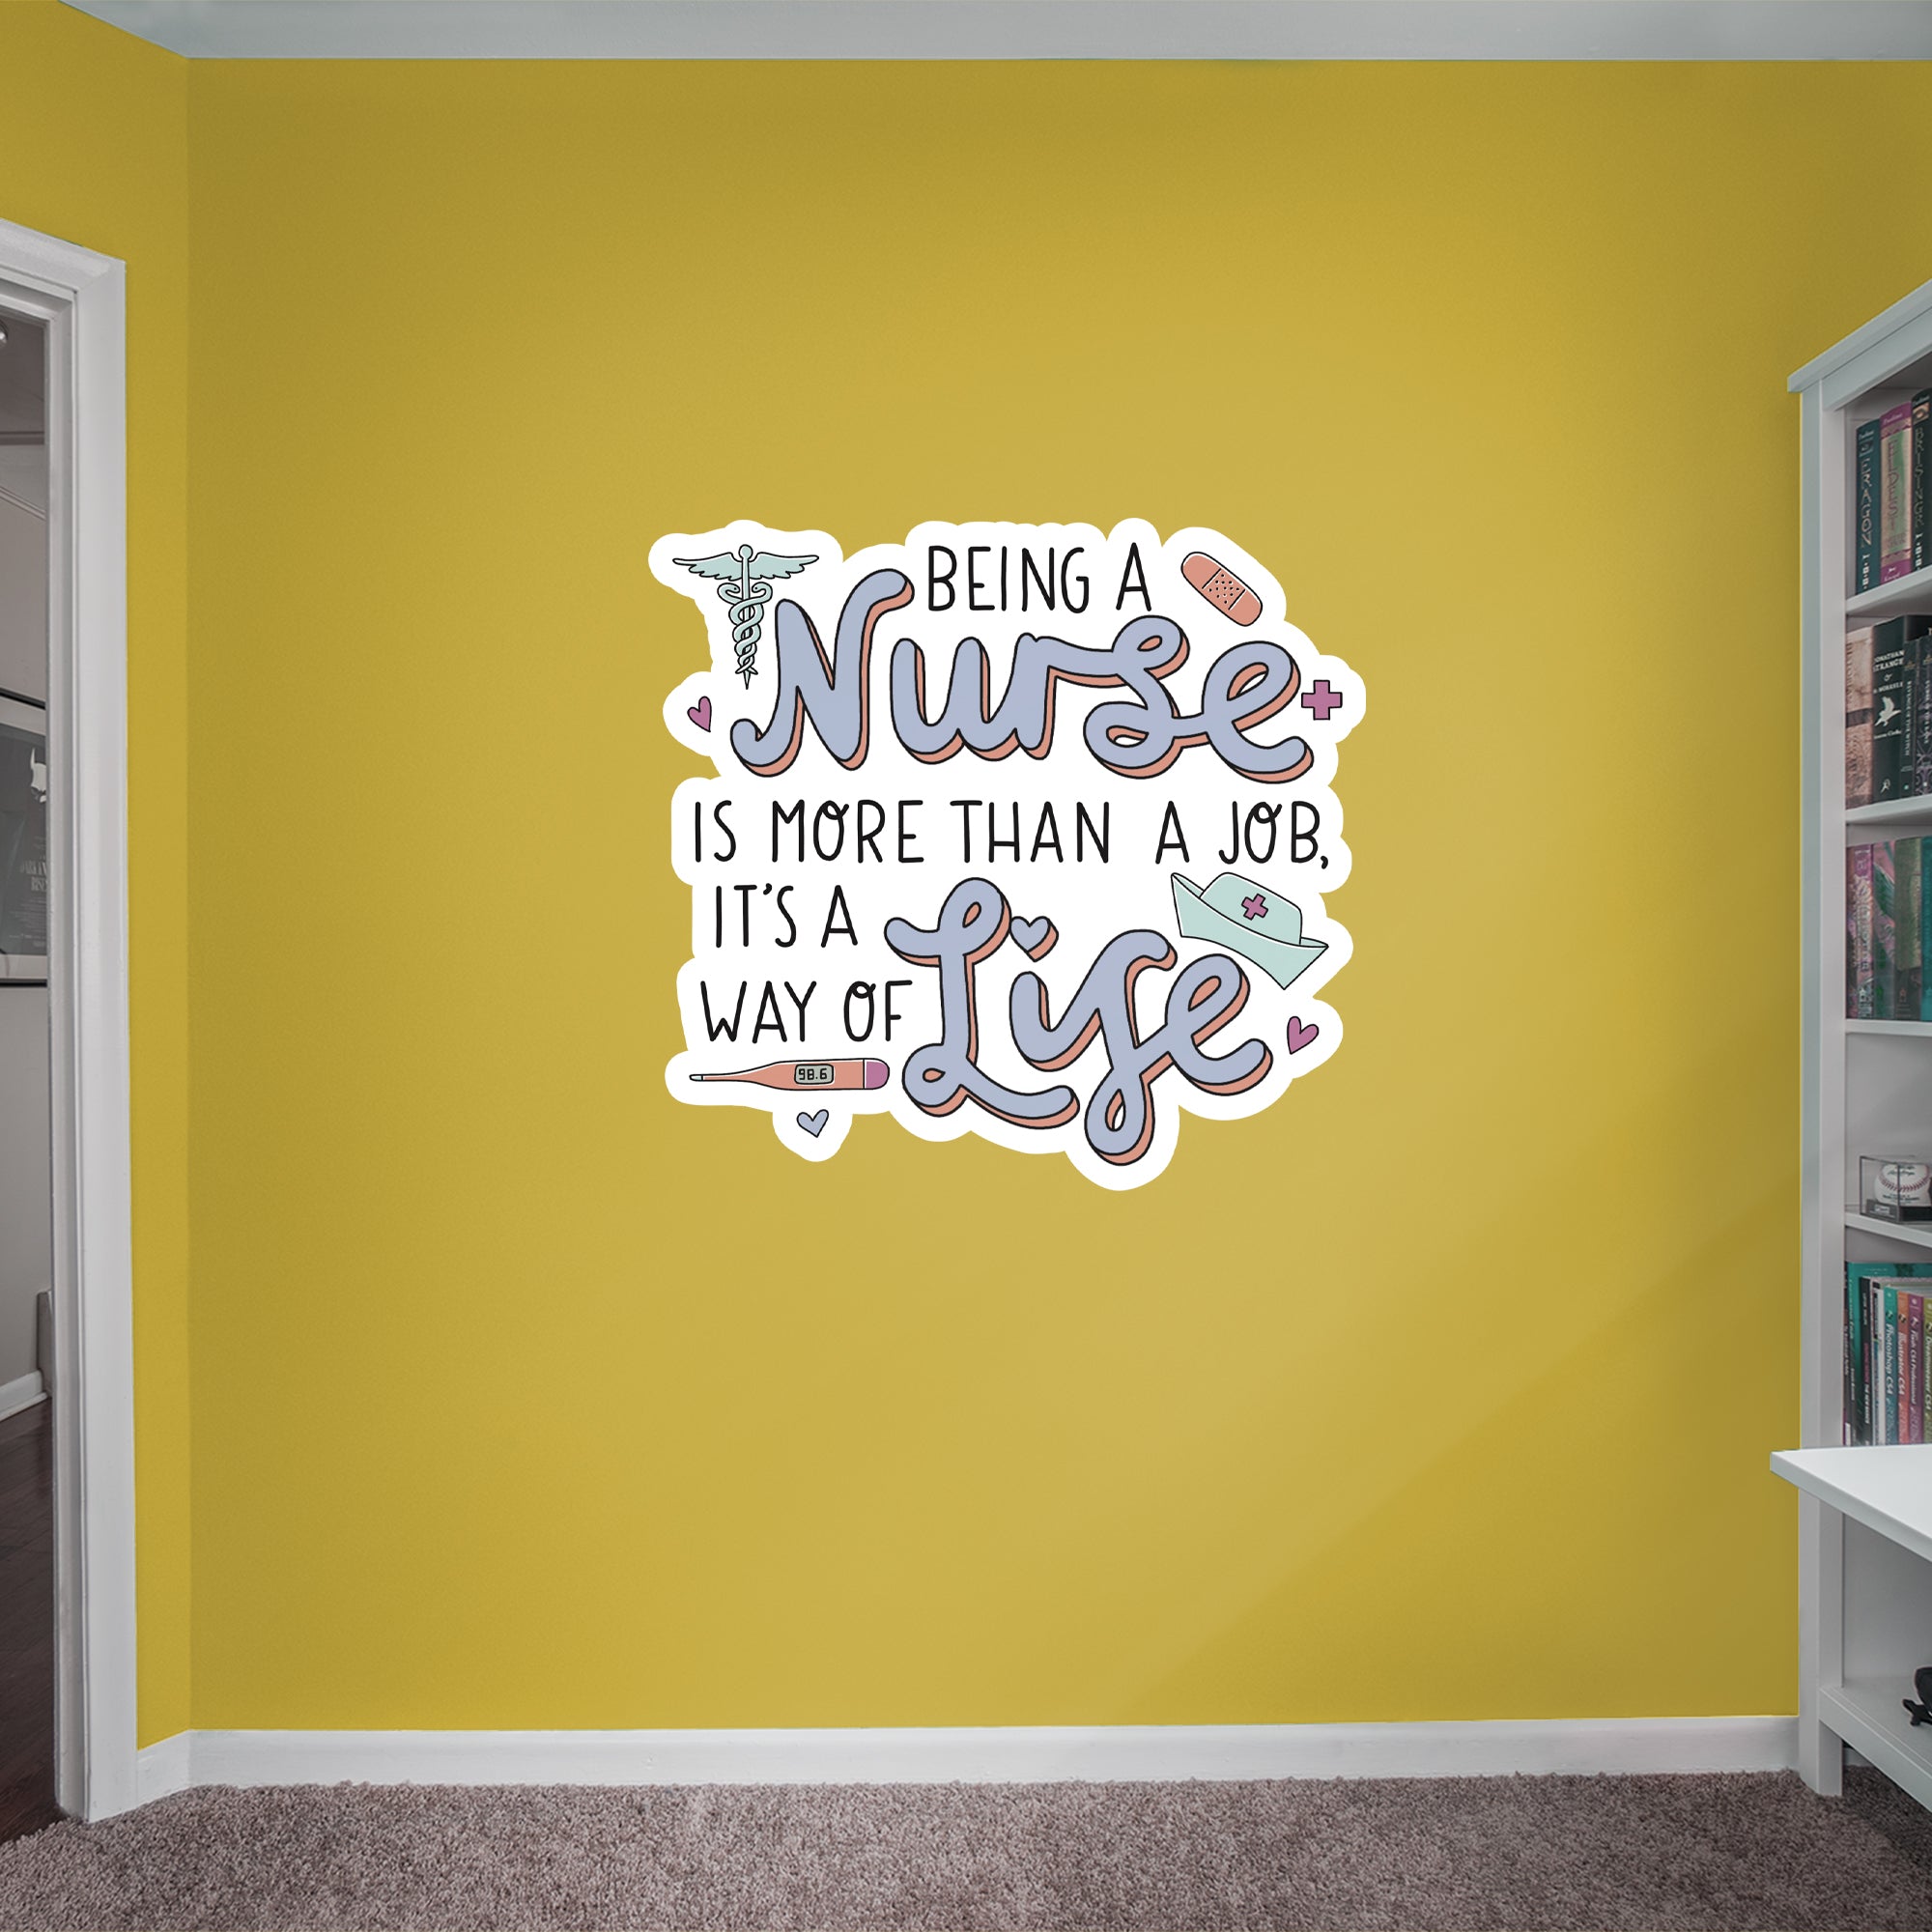 Being A Nurse Way Of Life - Officially Licensed Big Moods Removable Wall Decal Giant Decal (38"W x 41"H) by Fathead | Vinyl